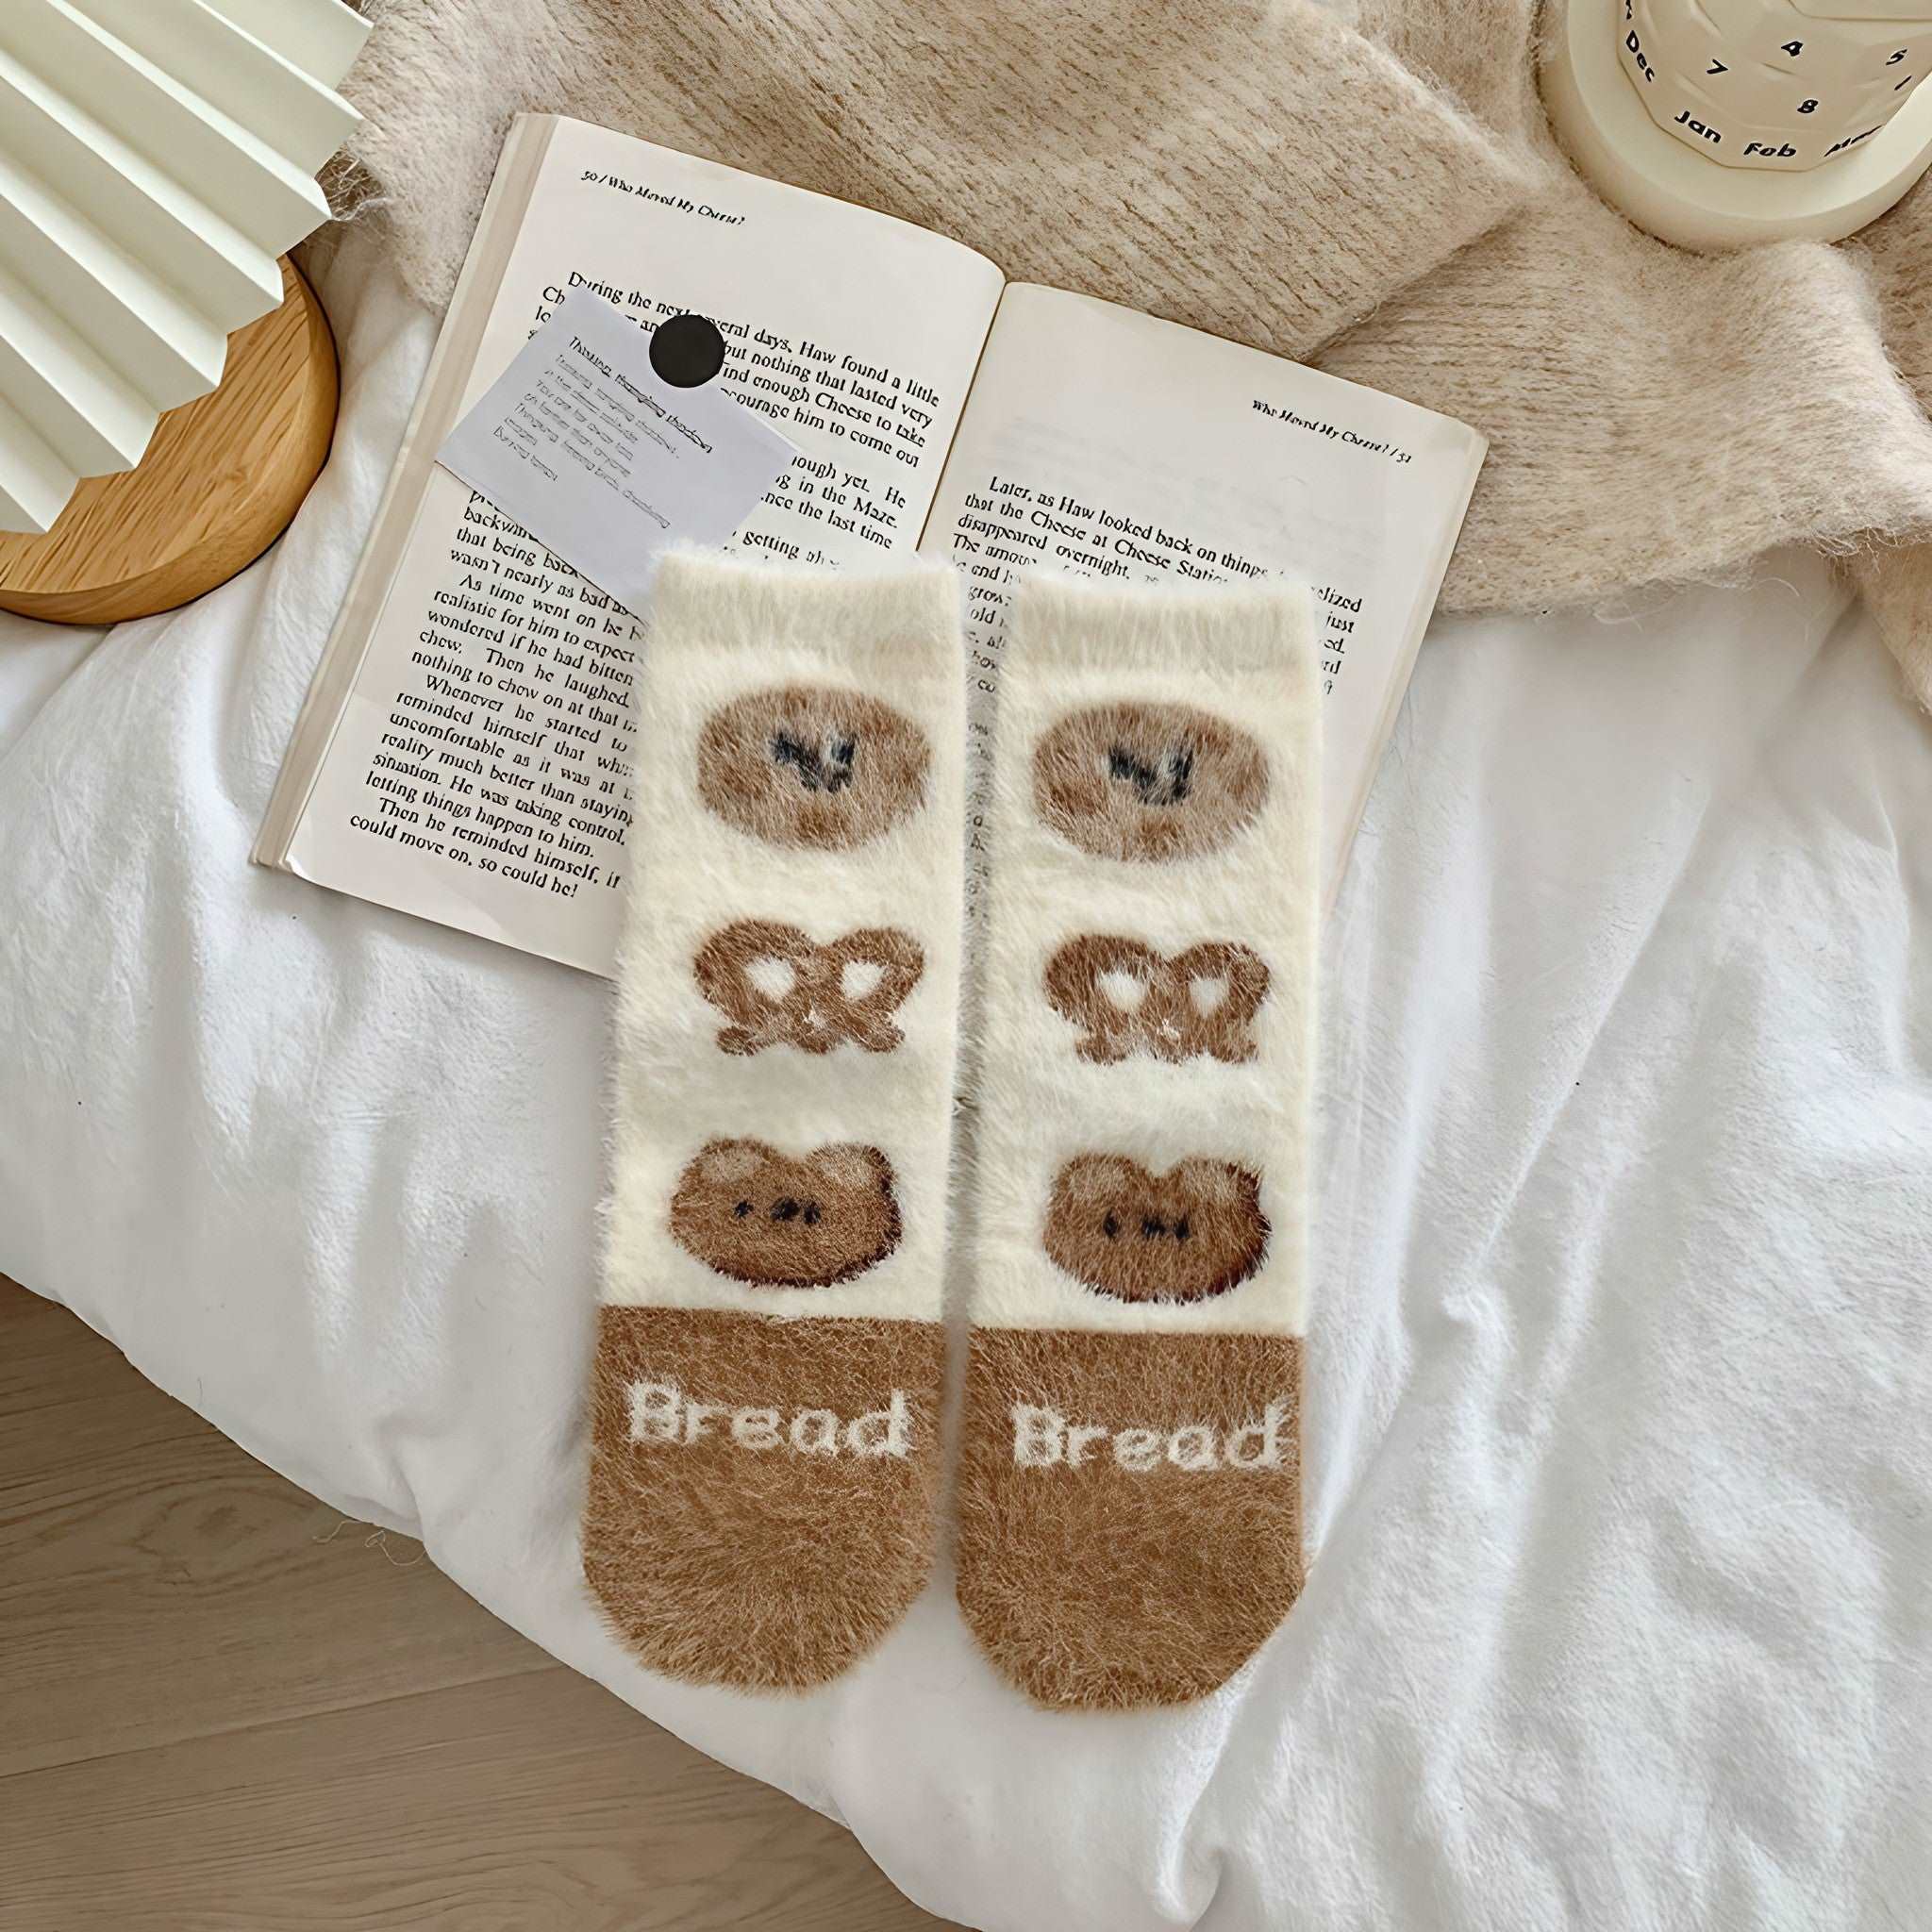 A cozy reading setup with a book and plush bear socks